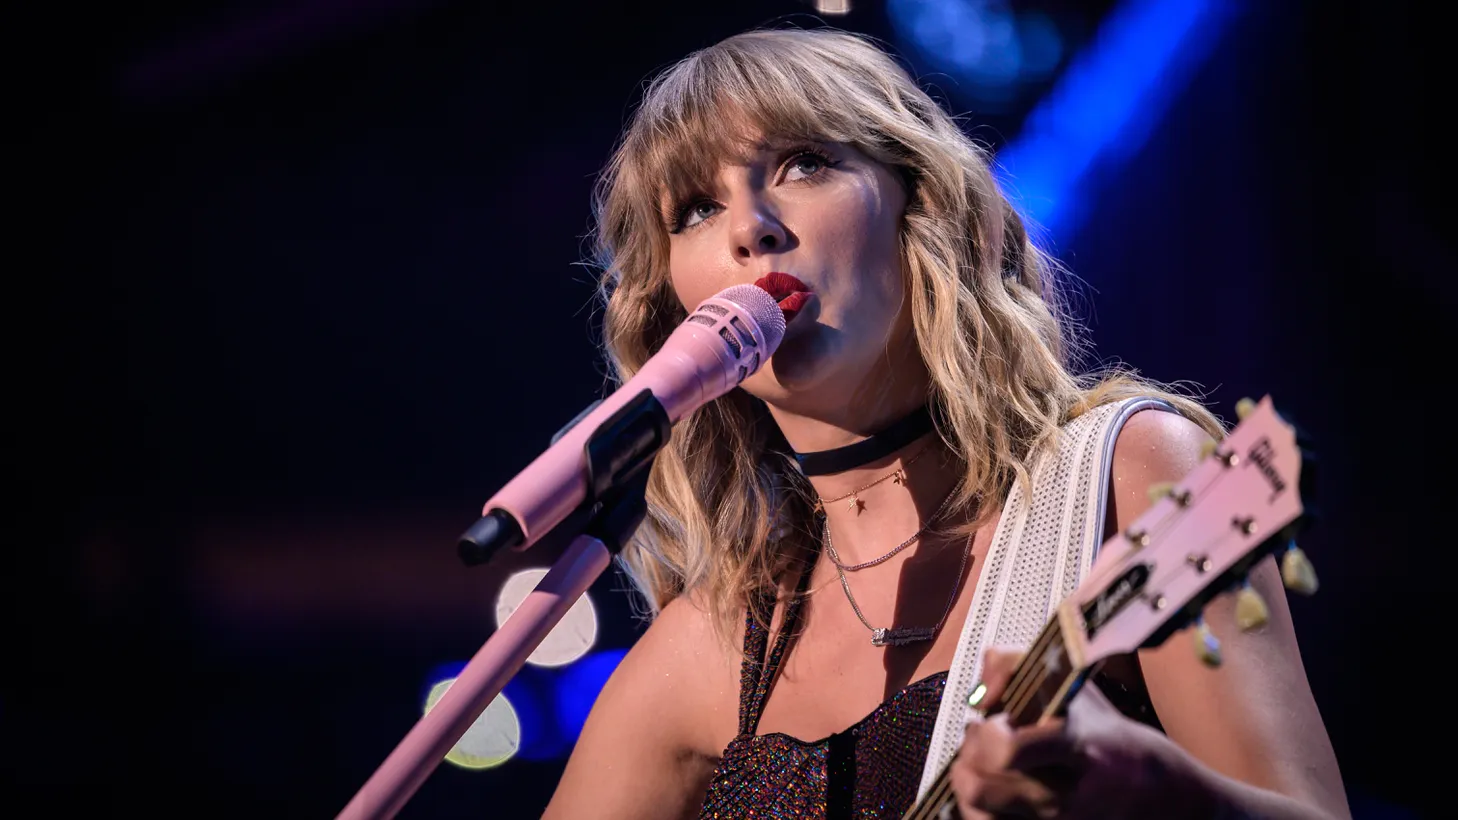 Taylor Swift performs at the 2019 Z100 Jingle Ball at Madison Square Garden in New York on December 13, 2019.